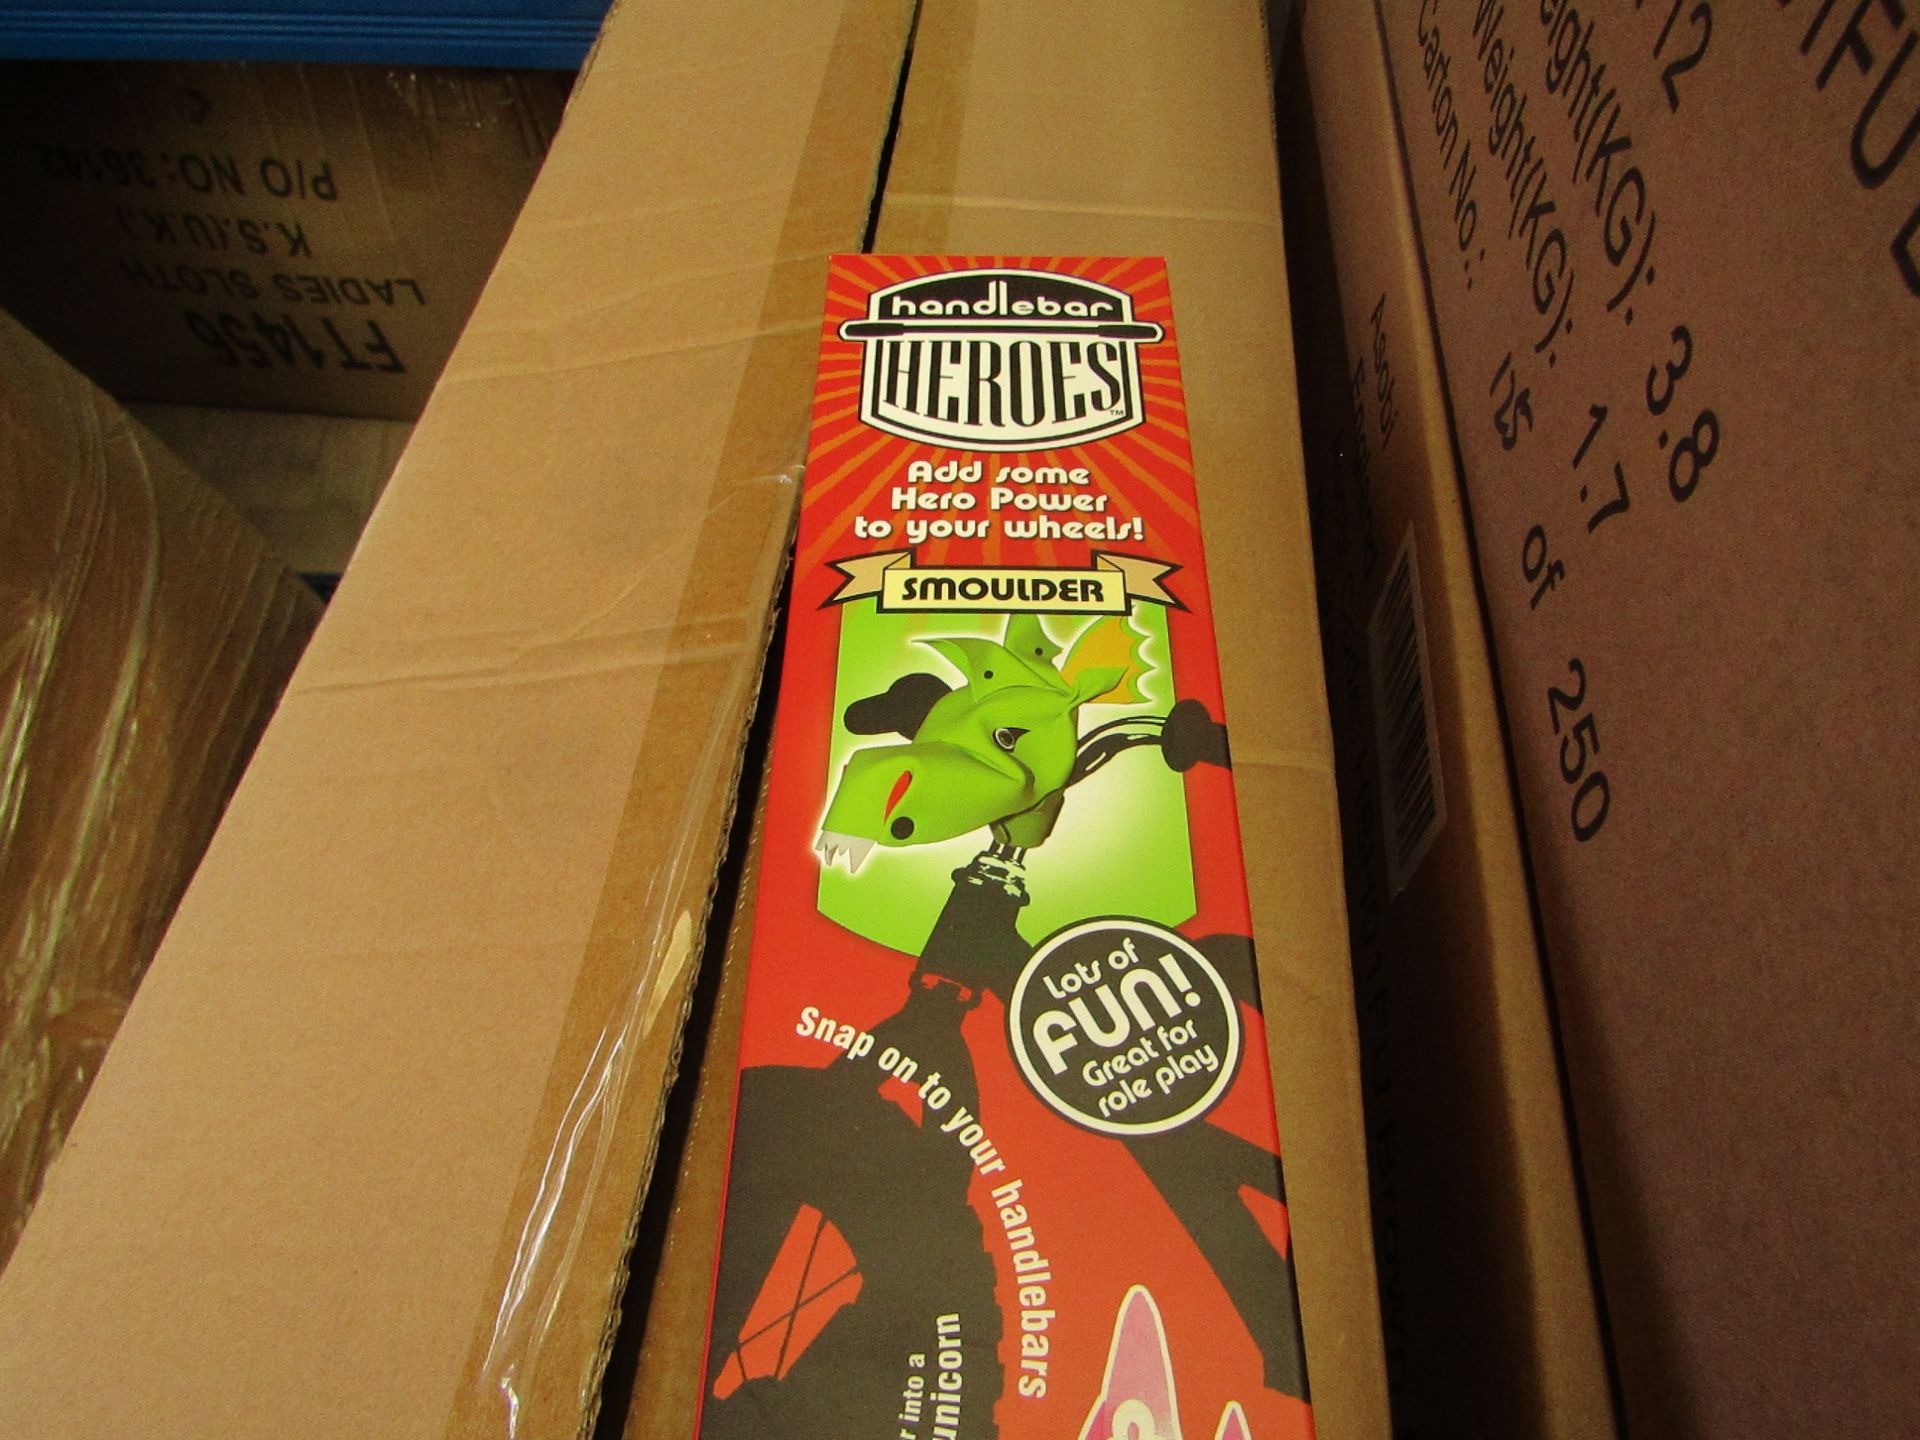 Handle Bar Heroes Smoulder Bike/Scooter Accessory. New & Boxed.